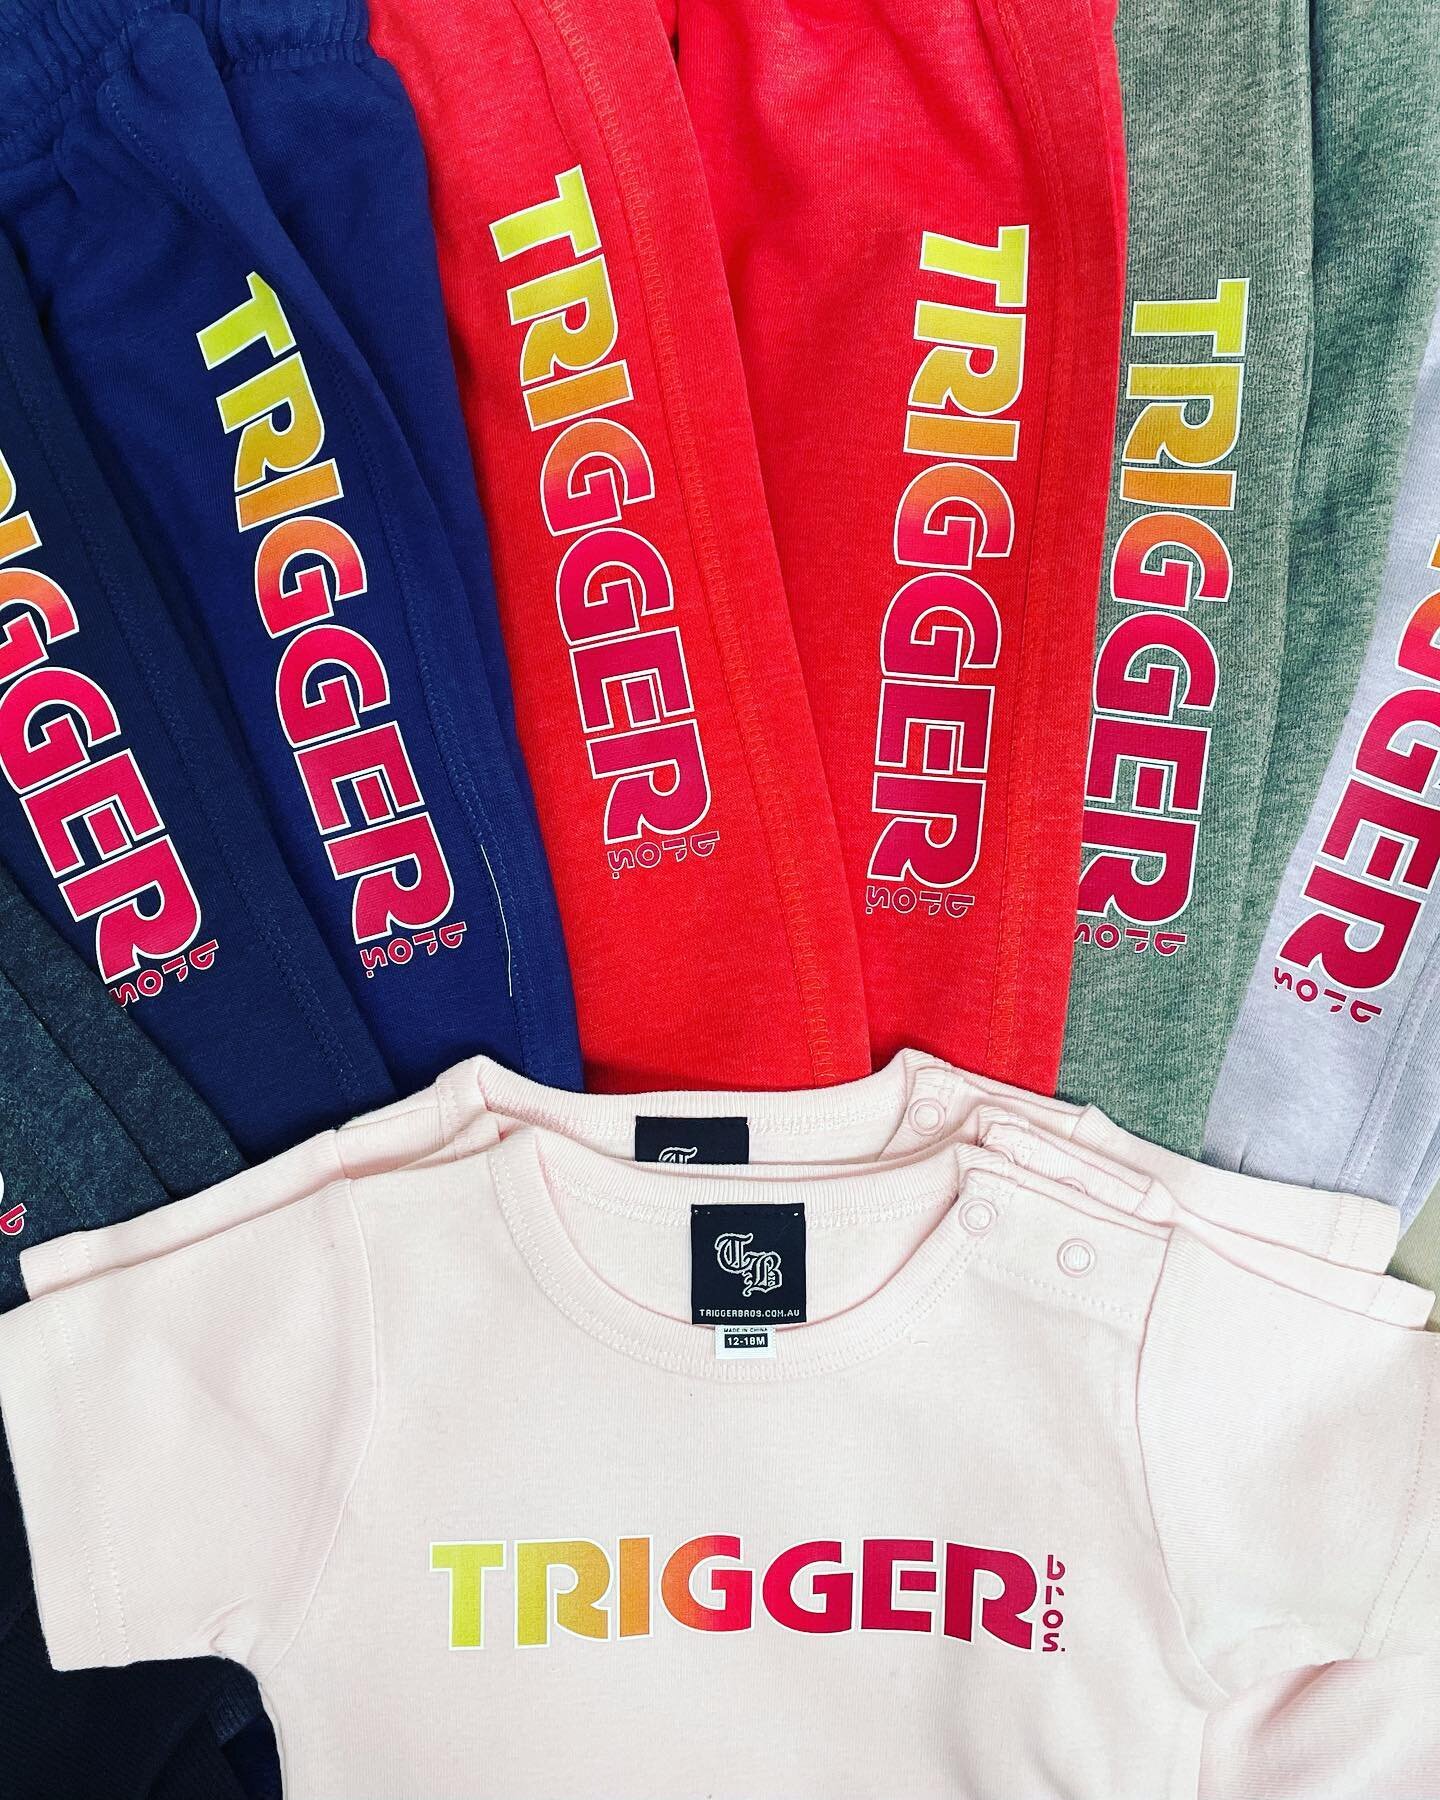 Quick run for @triggerbrothers. DTF printing at its finest! #triggerbros #ptleo #mplocal #dtfprinting #trackies #triggertrackies #merch #localbusiness